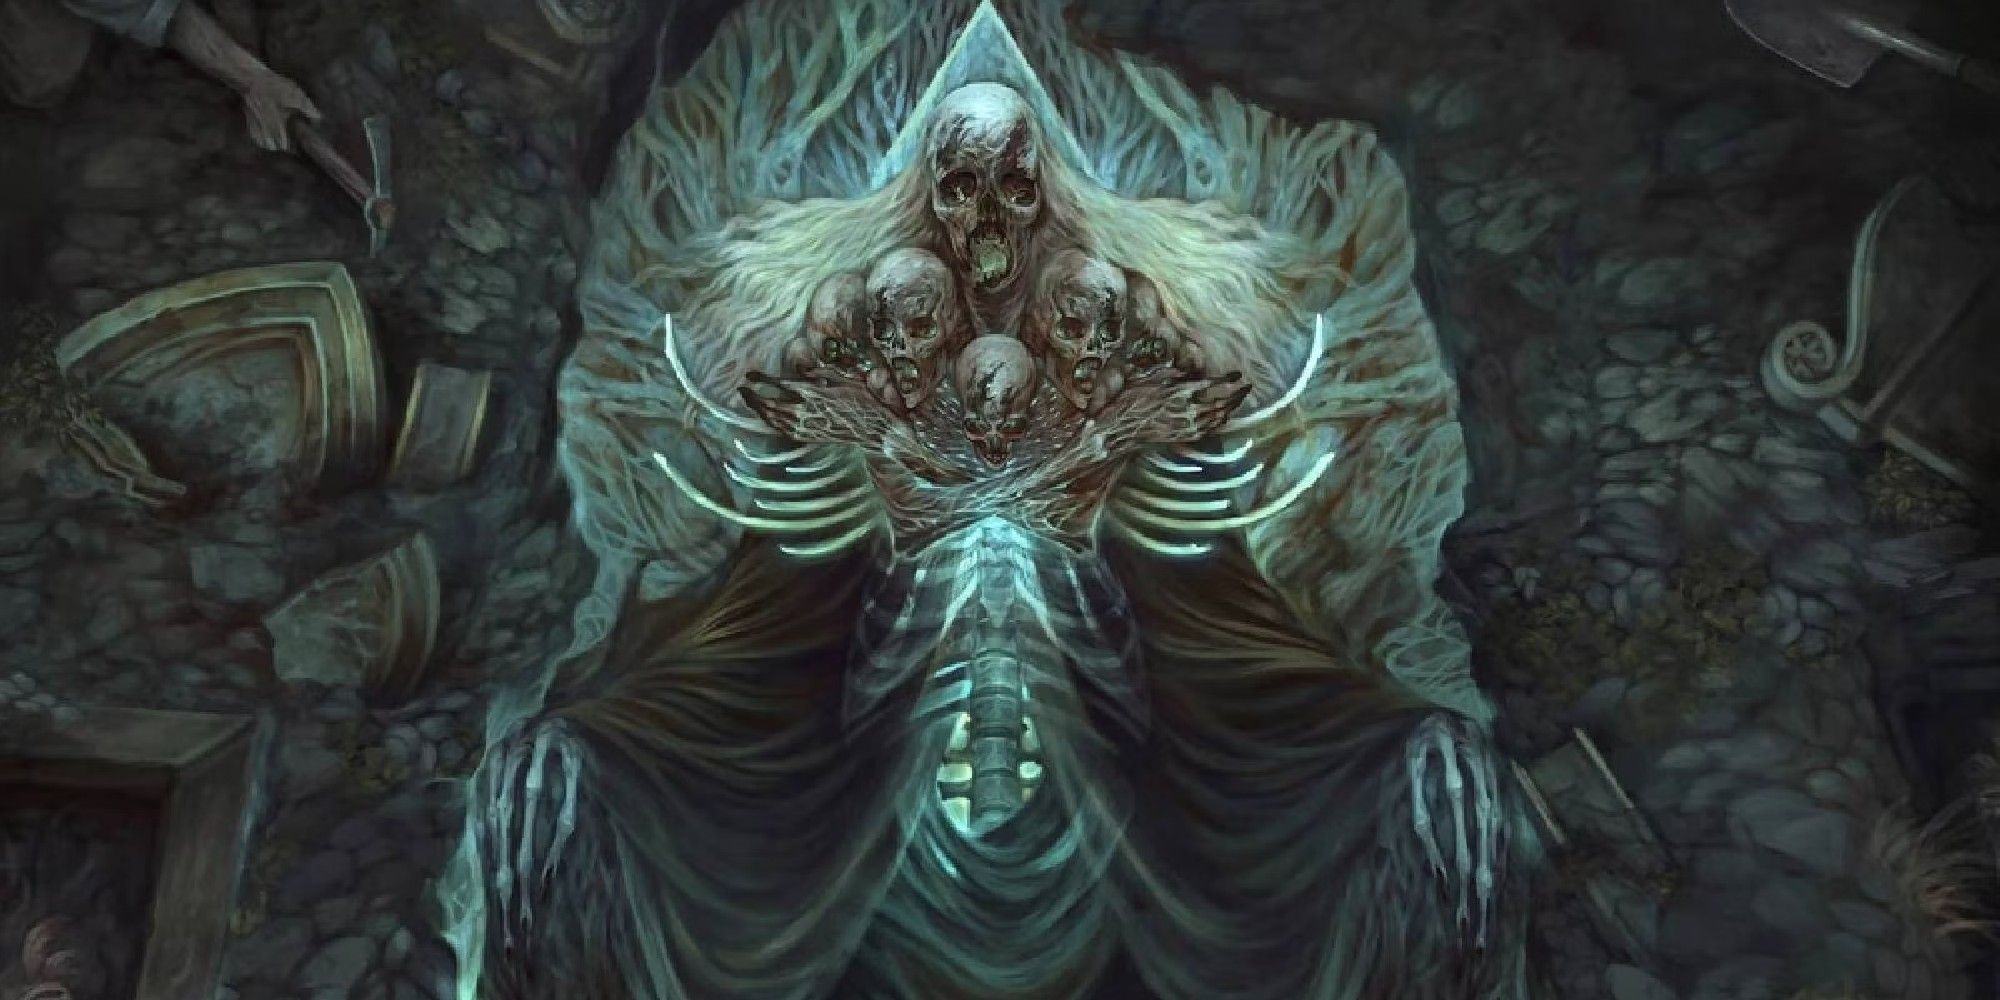 Dungeons & Dragons image showing miners unerthing Myrkul